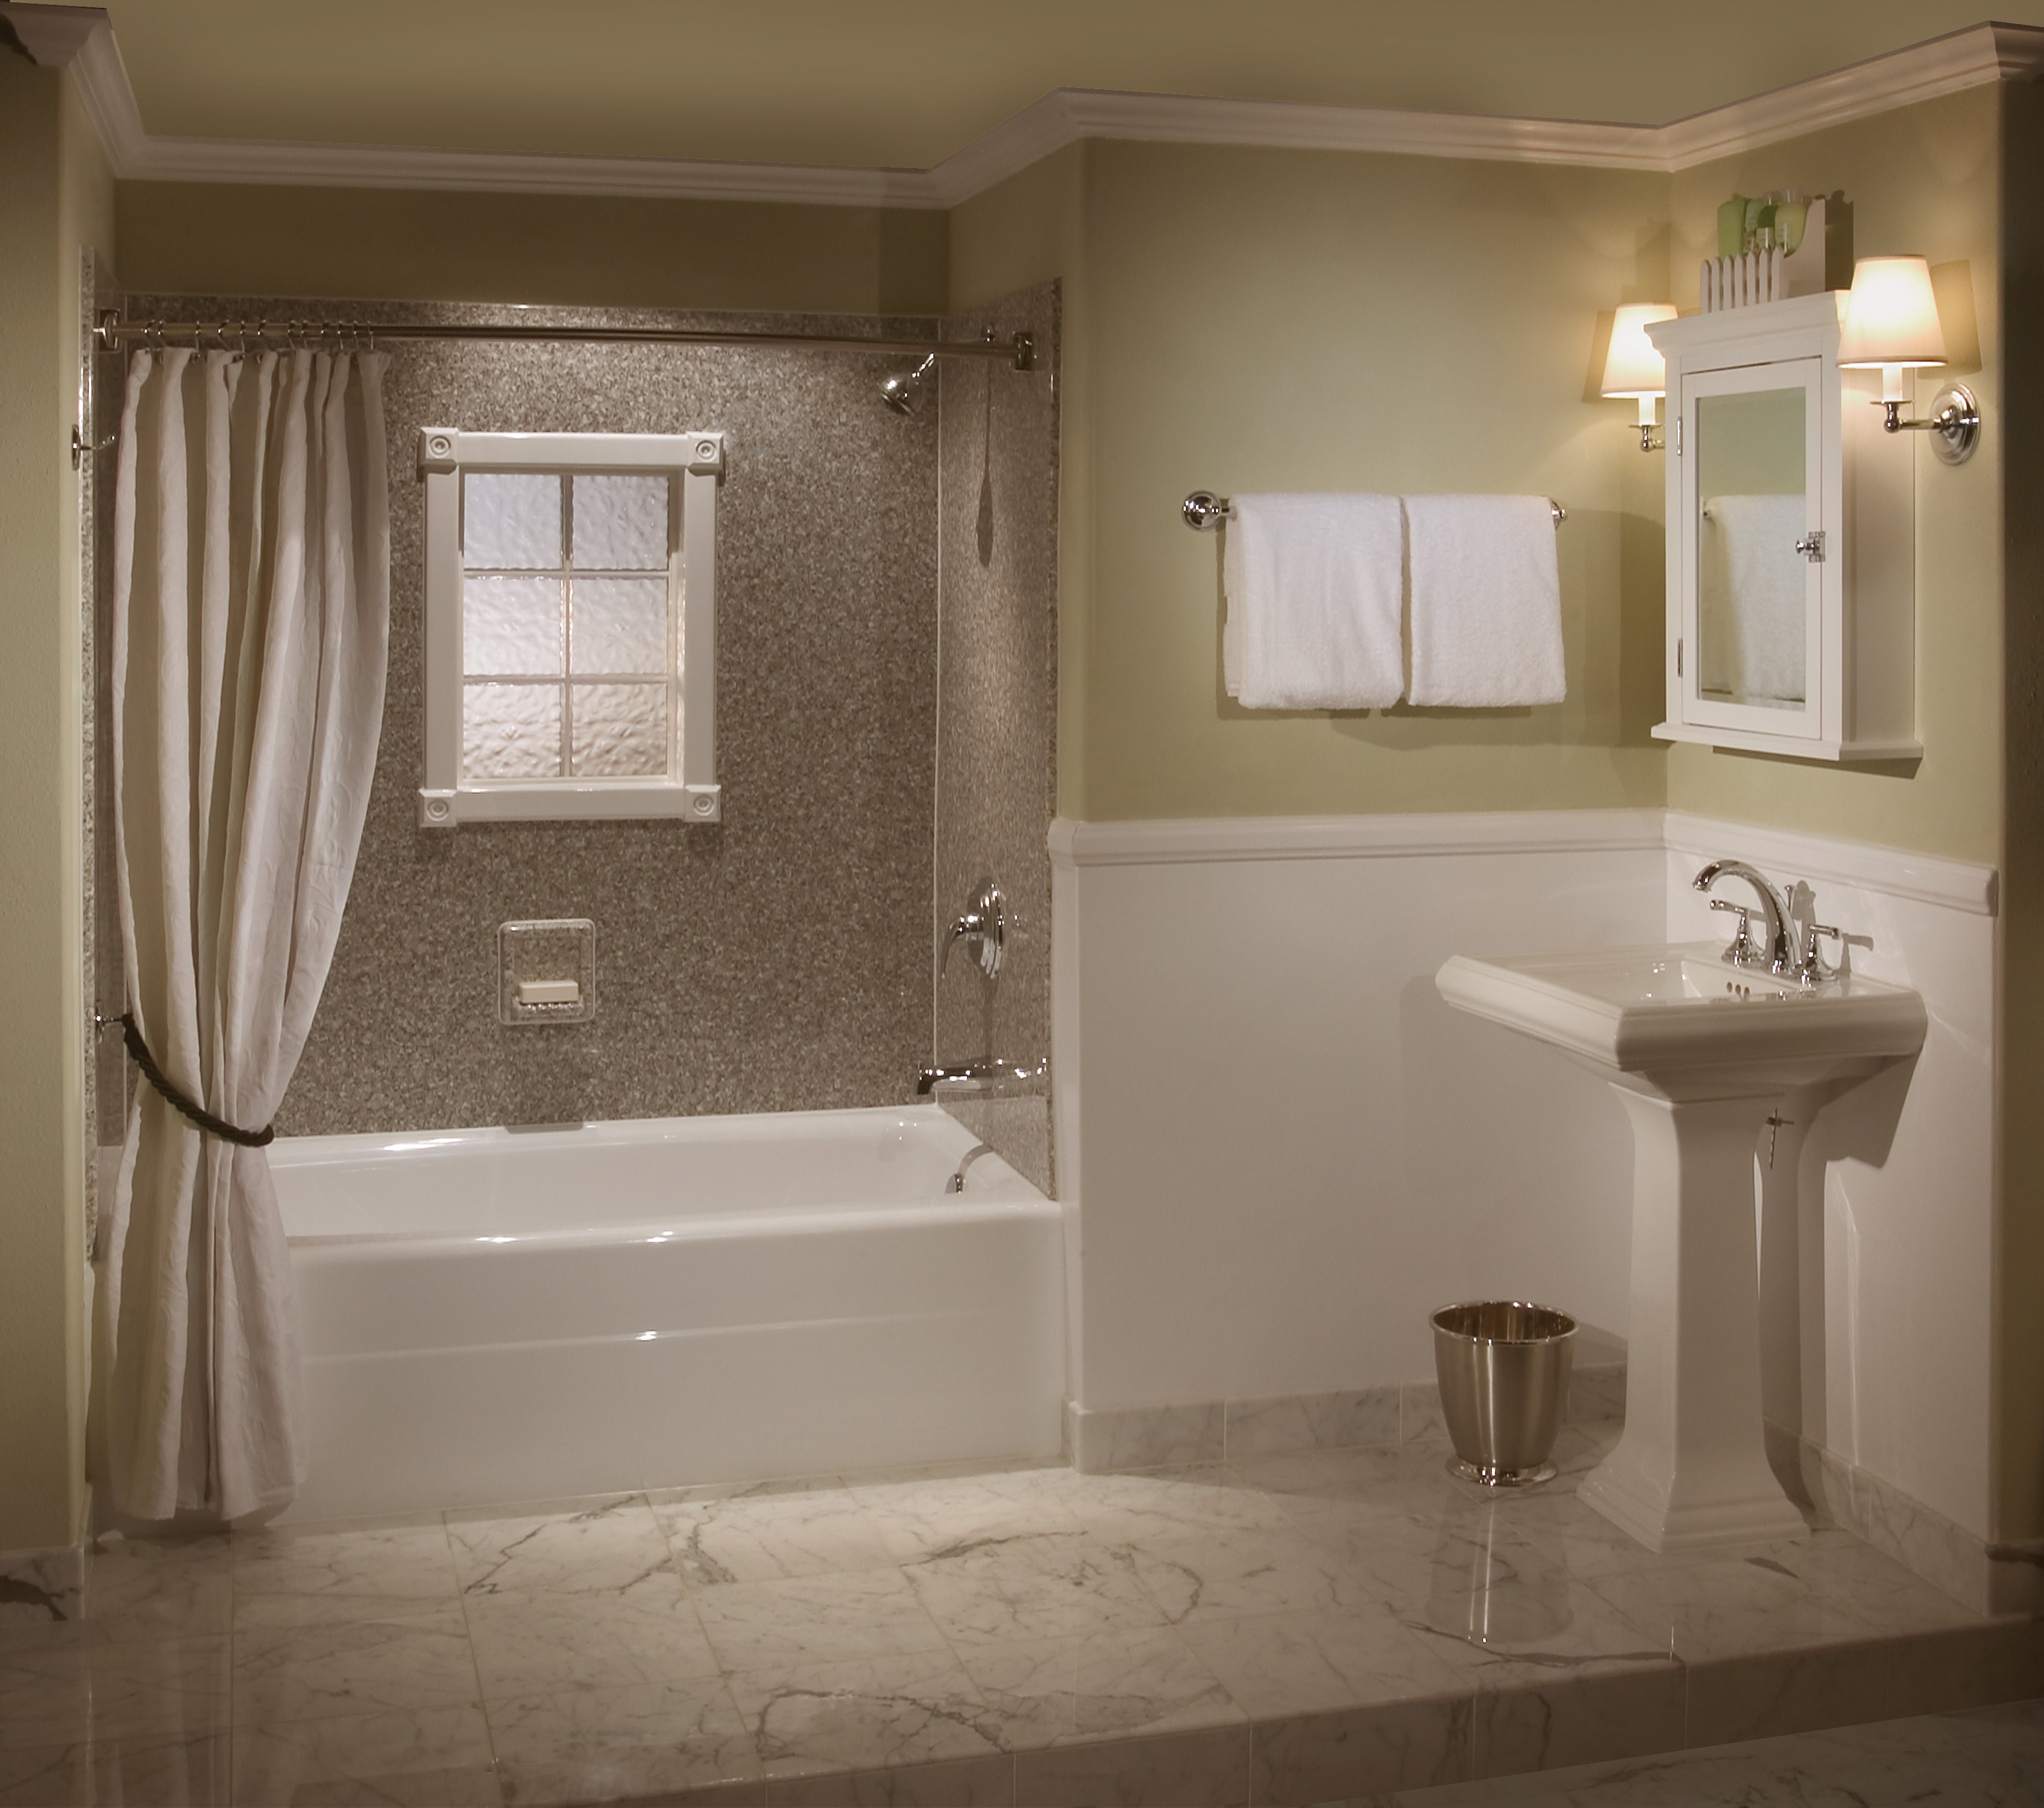 Remodeling The Bathroom Large And Beautiful Photos Photo To